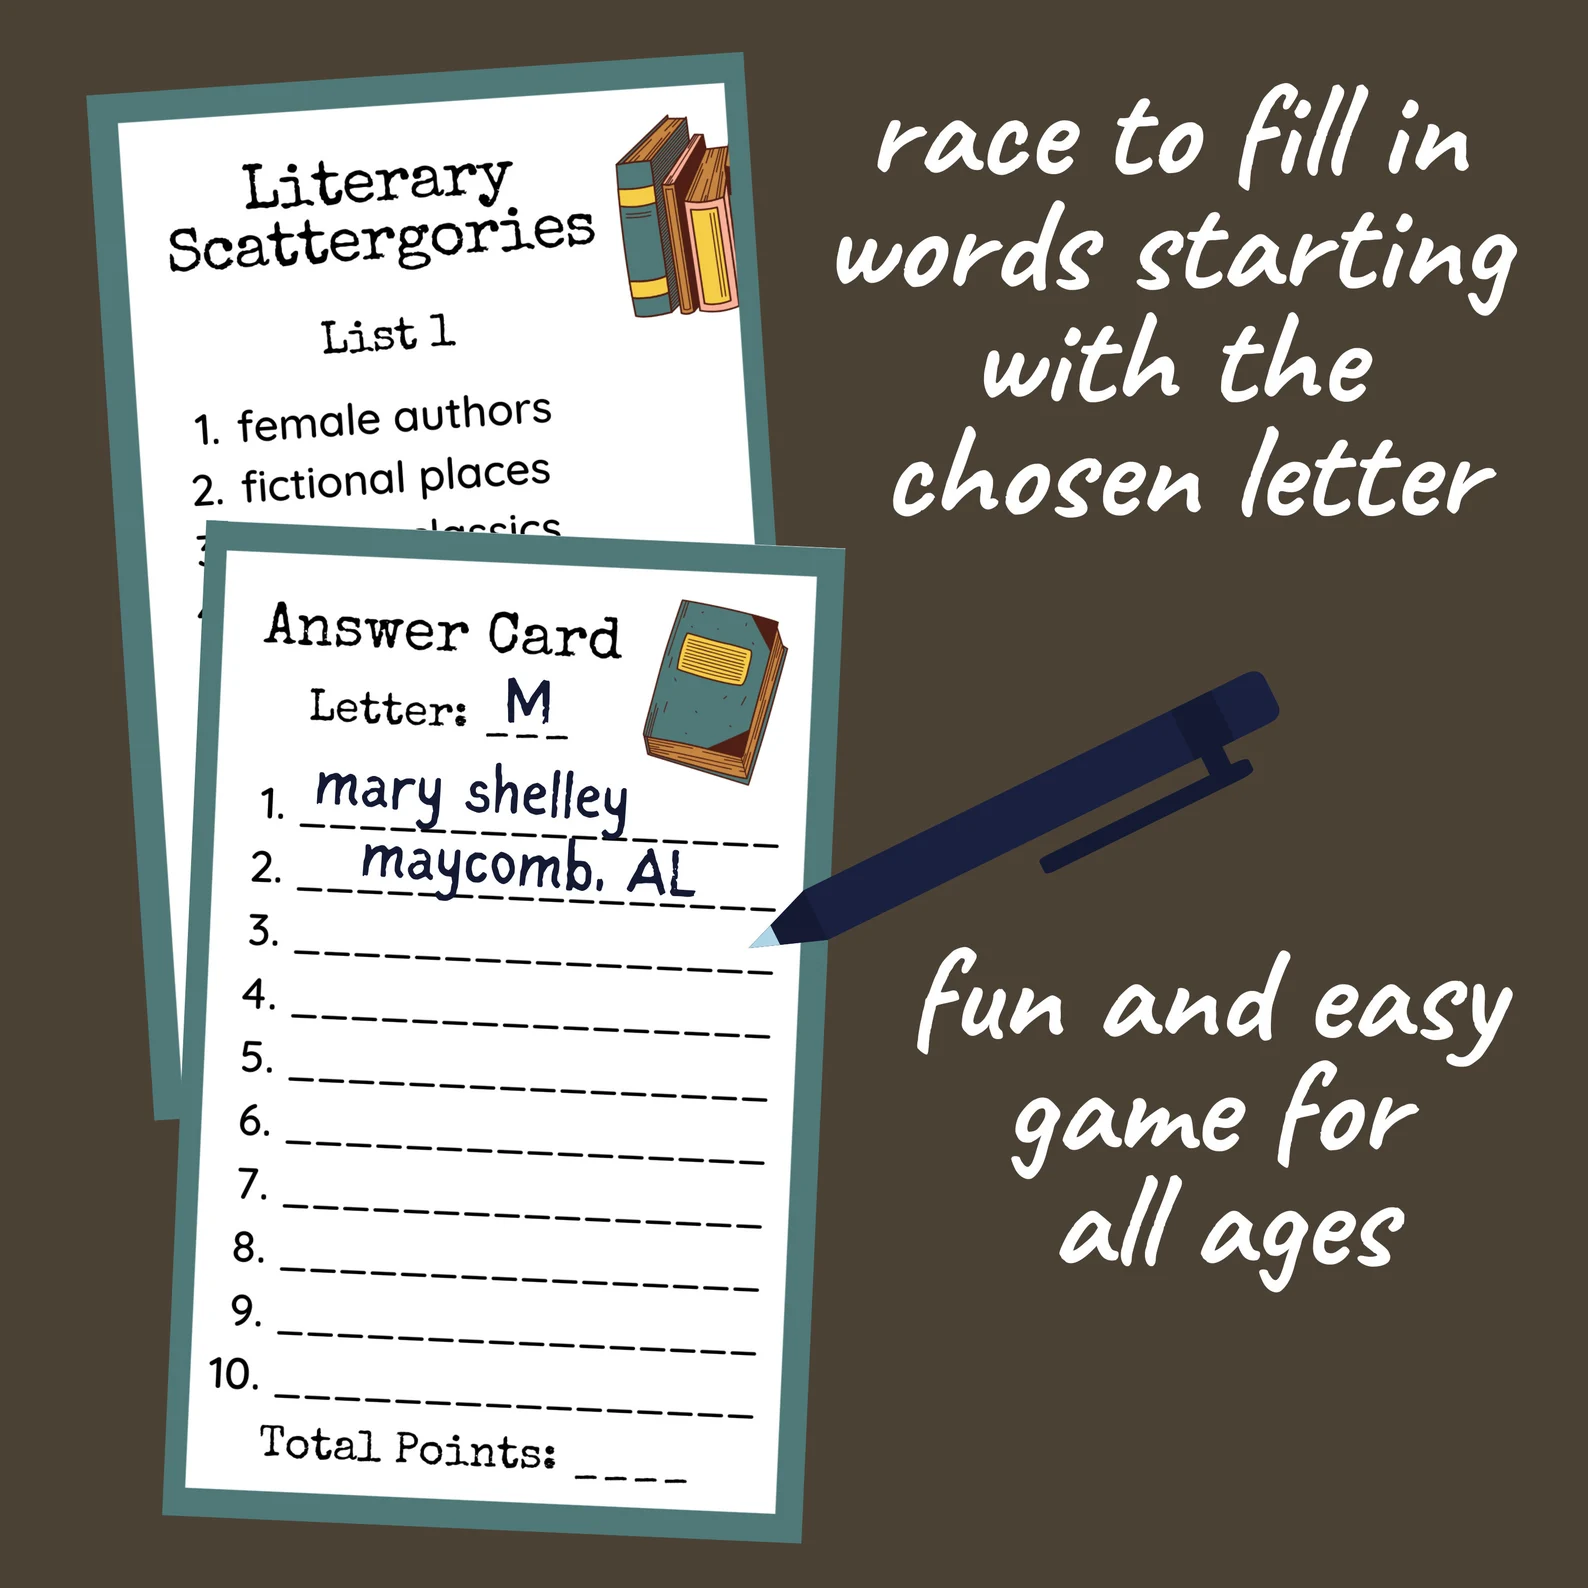 Image from literary scattegories